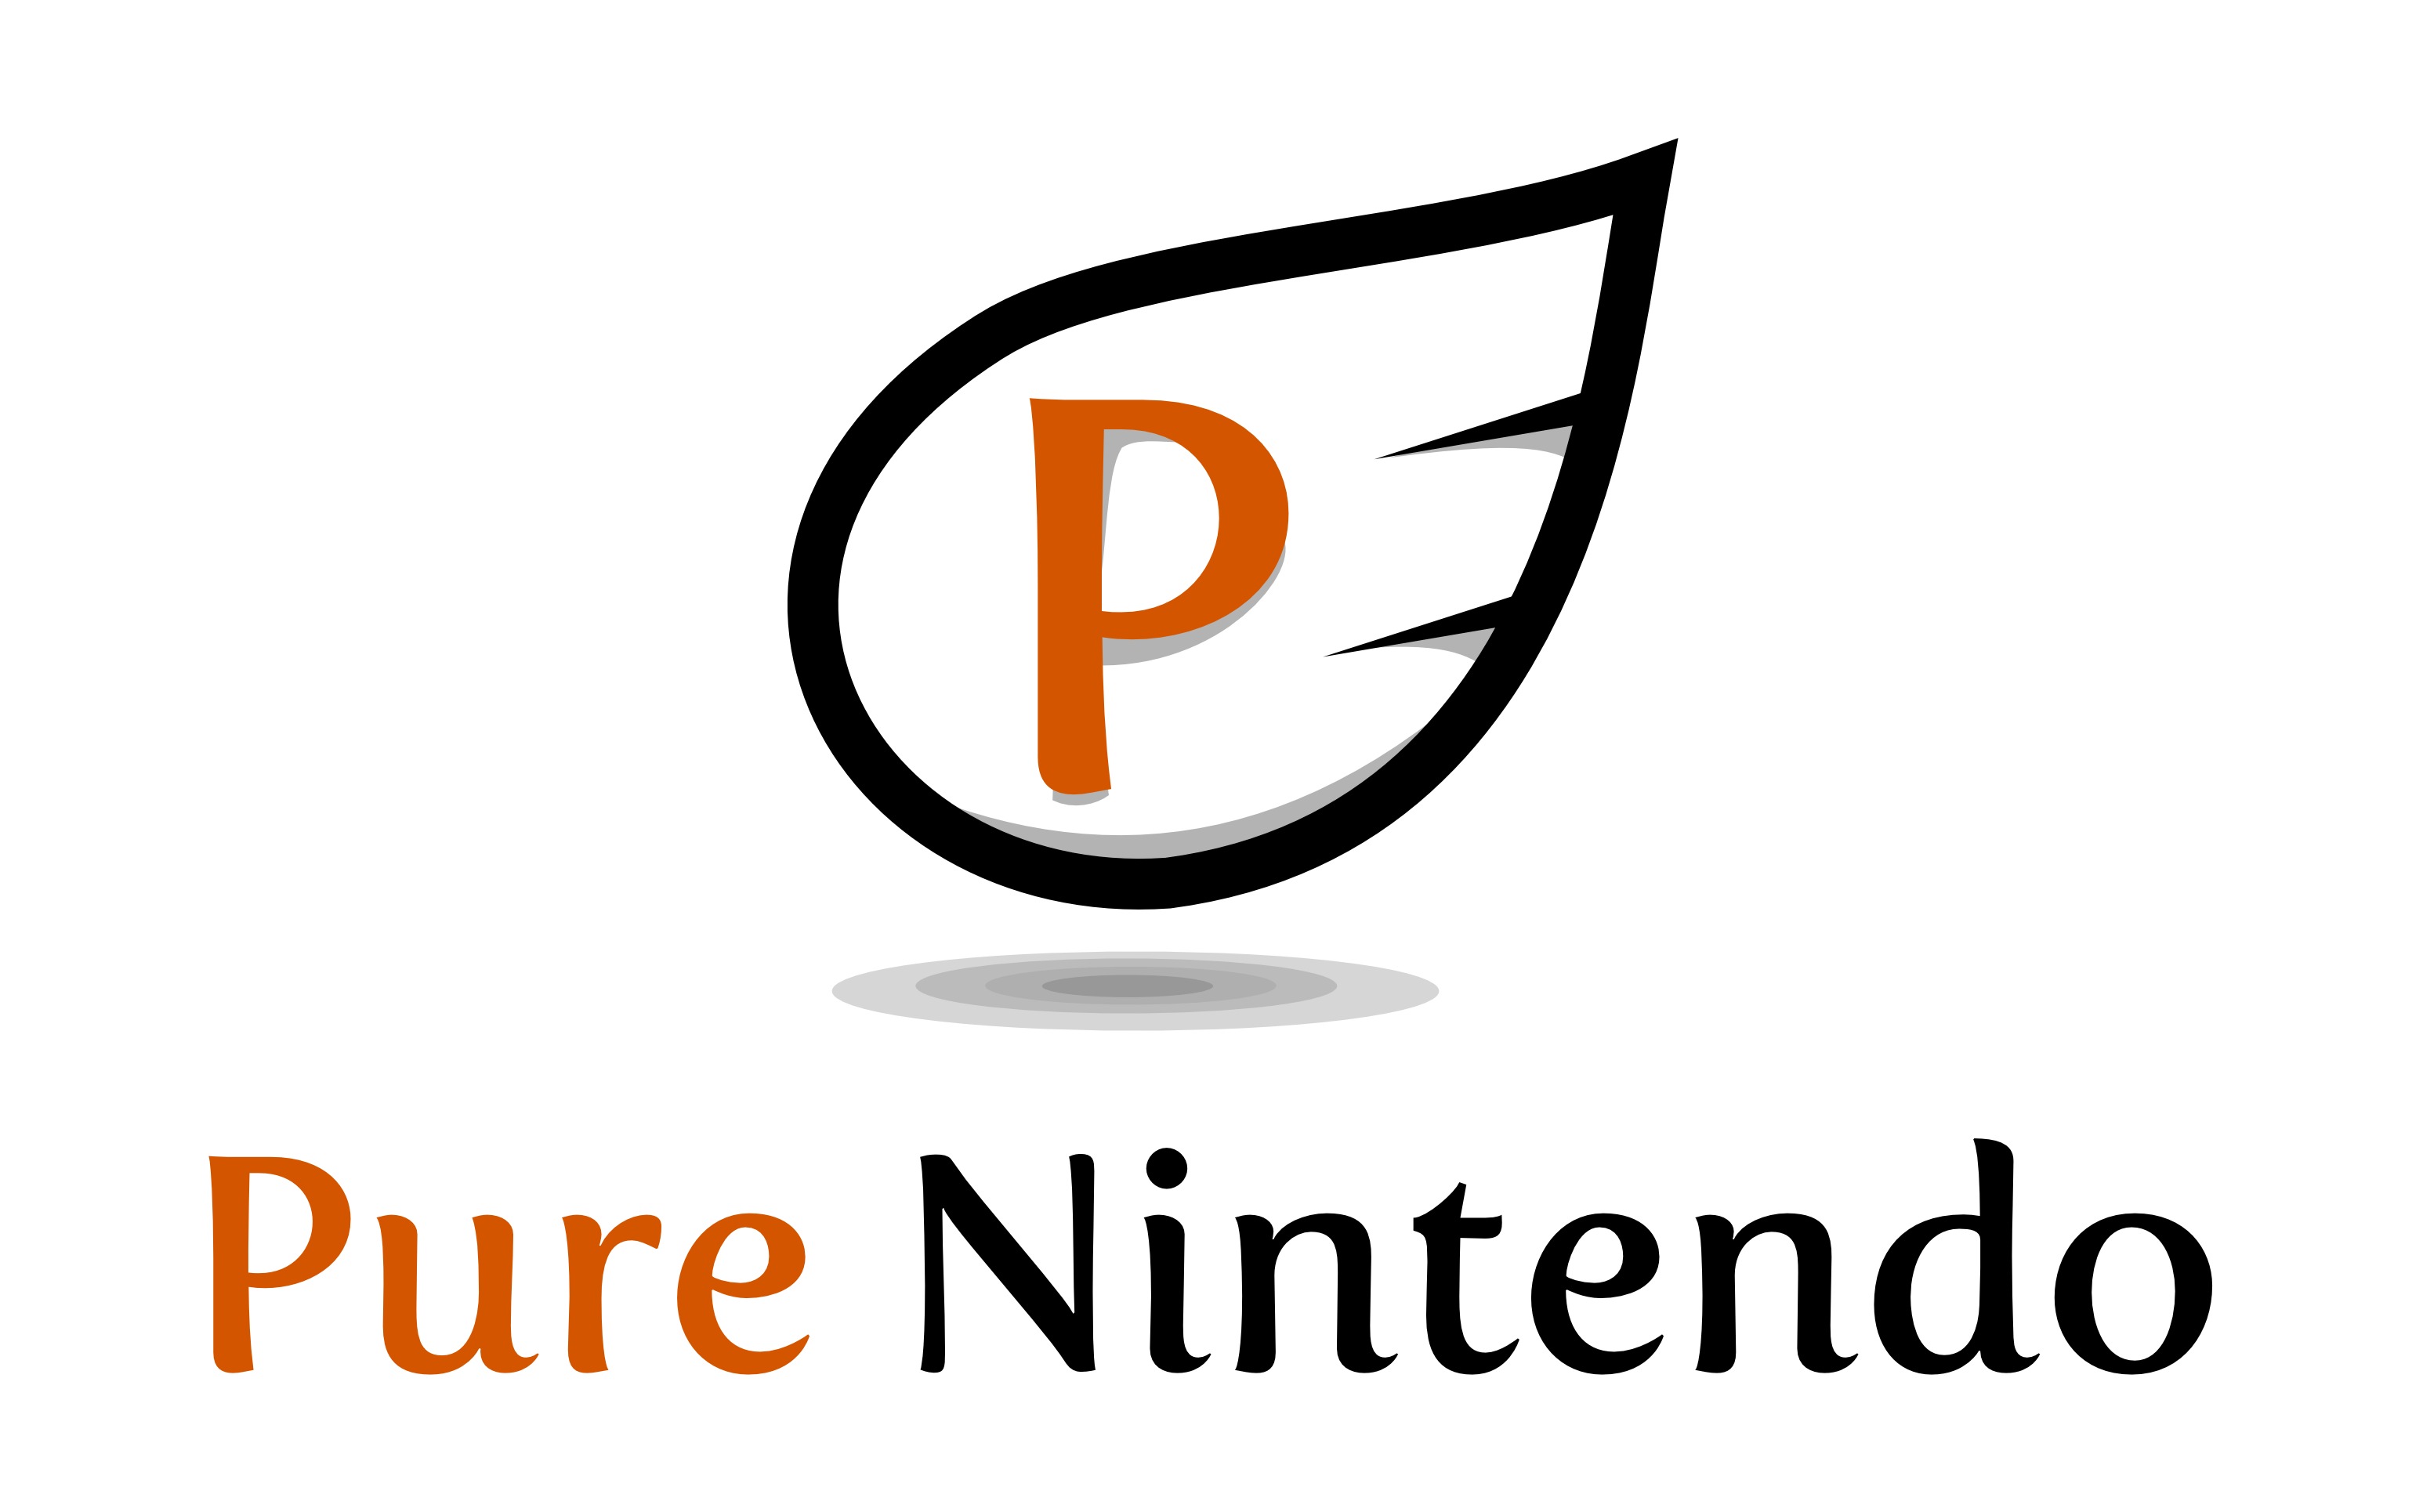 Pure Nintendo: Day One Action Happens Here